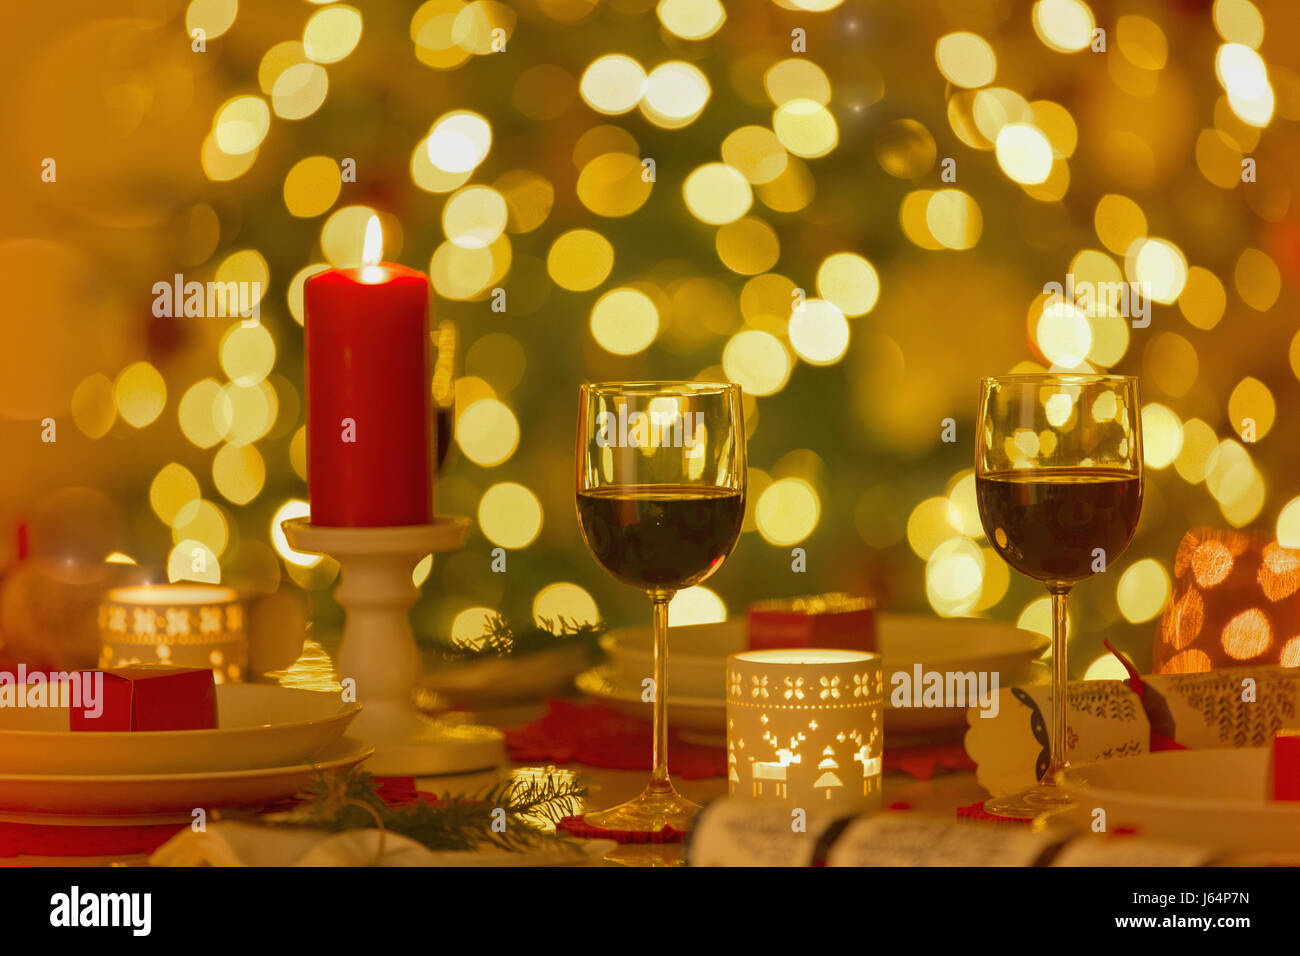 Red wine and candles on ambient Christmas dinner table Stock Photo